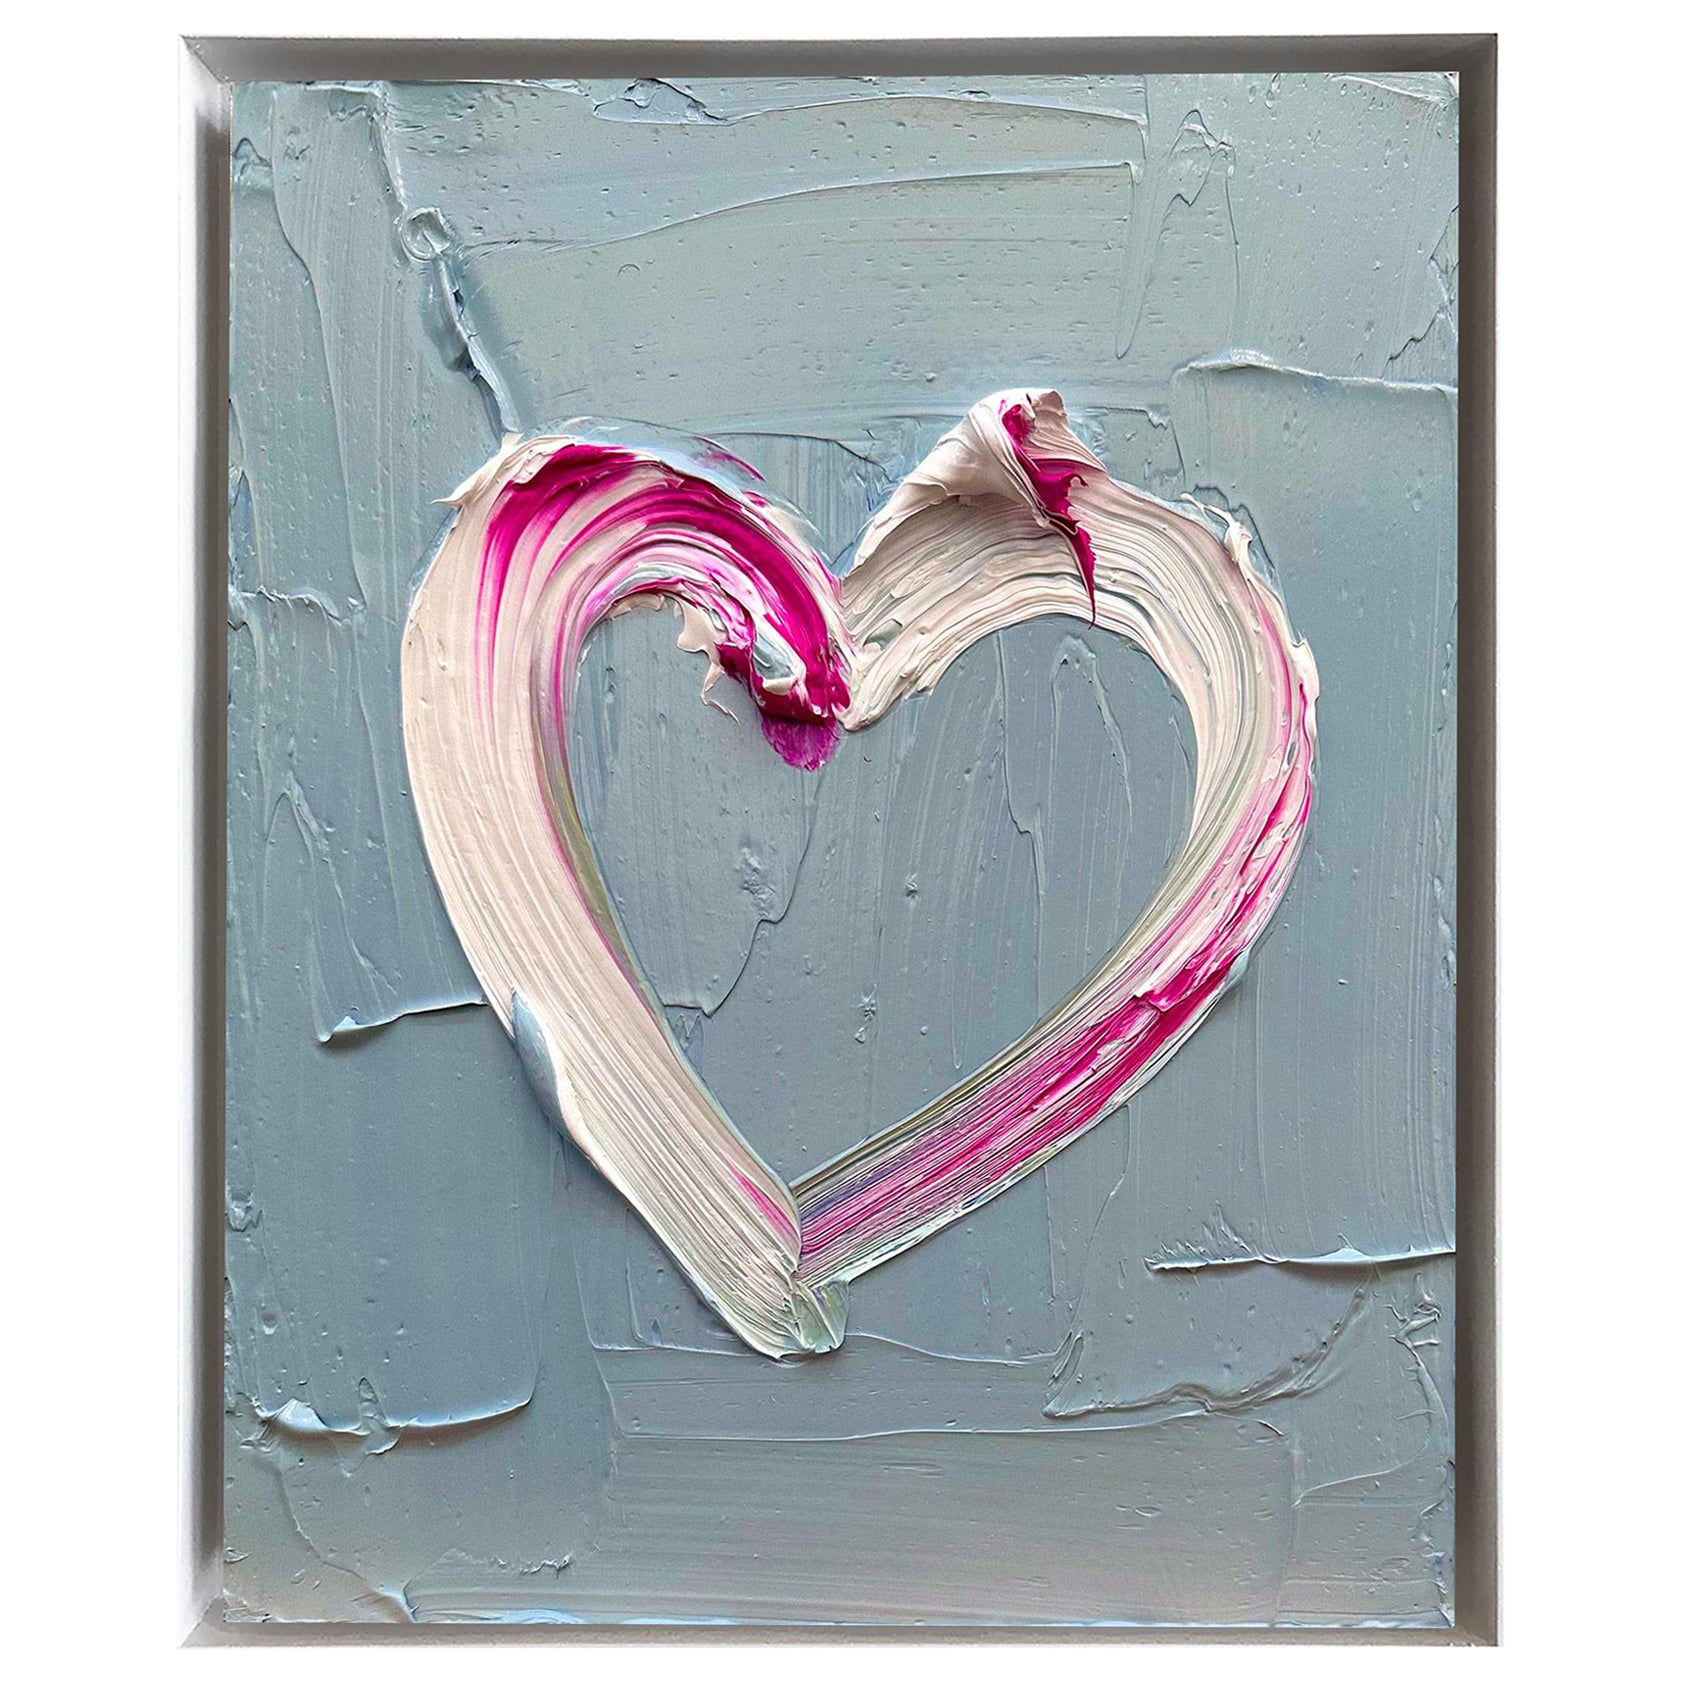 Cindy Shaoul Abstract Painting - "My Hermès Heart" Contemporary Oil Painting on Wood White Floater Frame